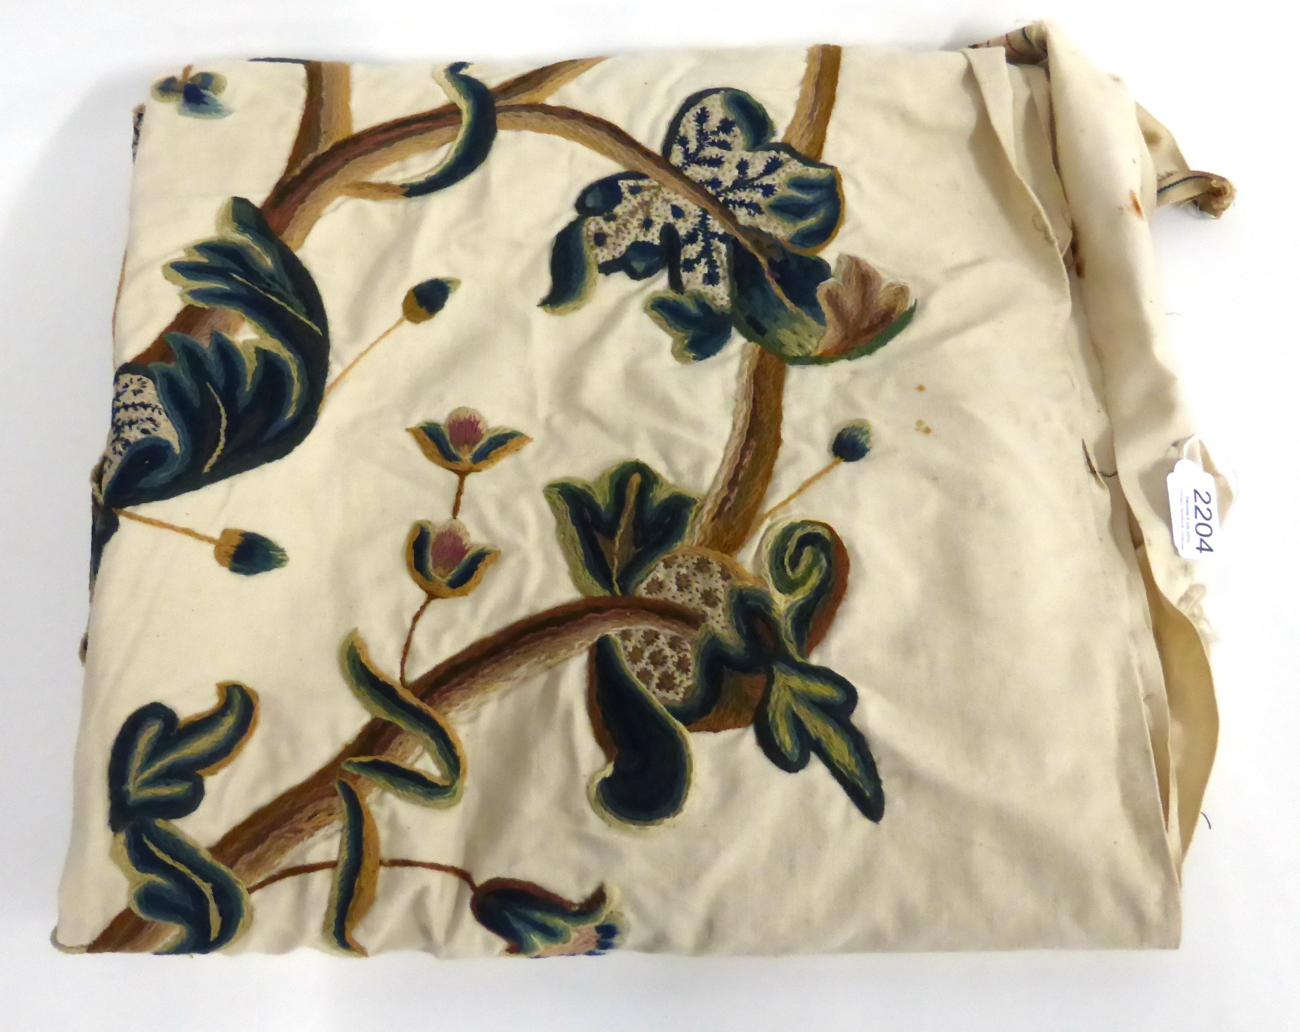 Part 18th Century Crewelwork  Wool Appliques partially restored and restitched onto a modern